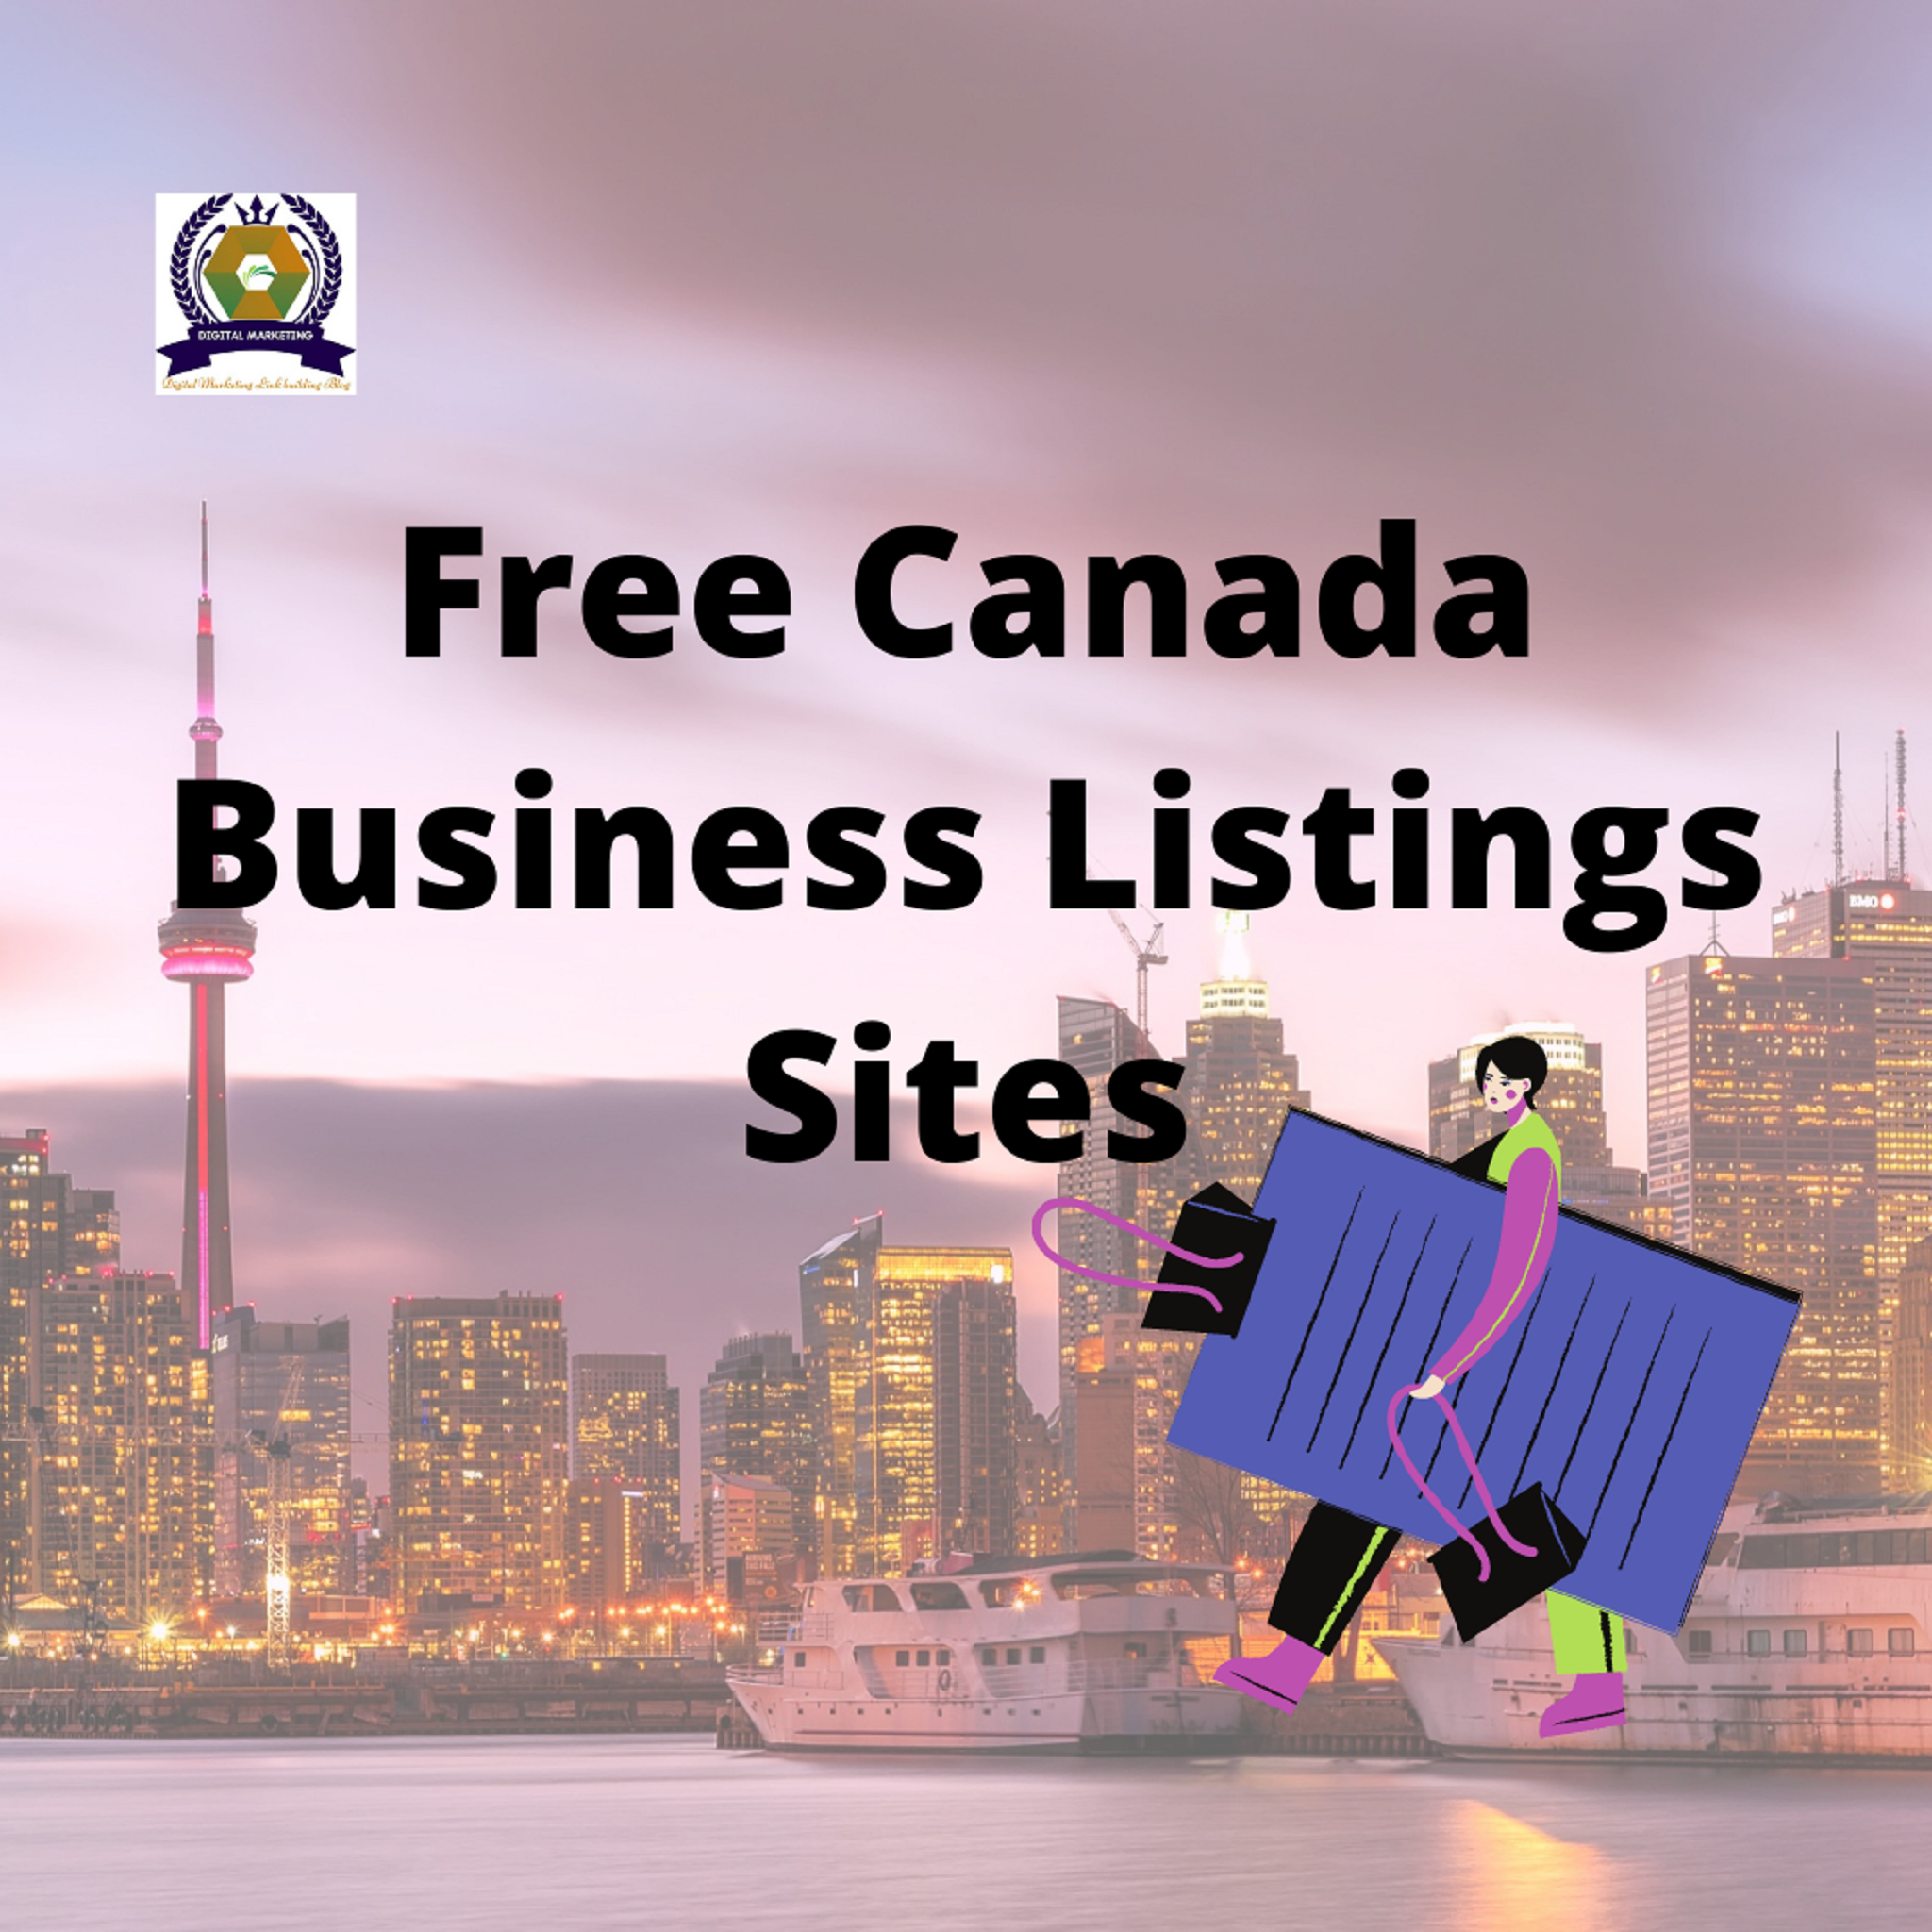 Free Canada Business Listings Sites List for improve your blog or website traffic - OneMantra One